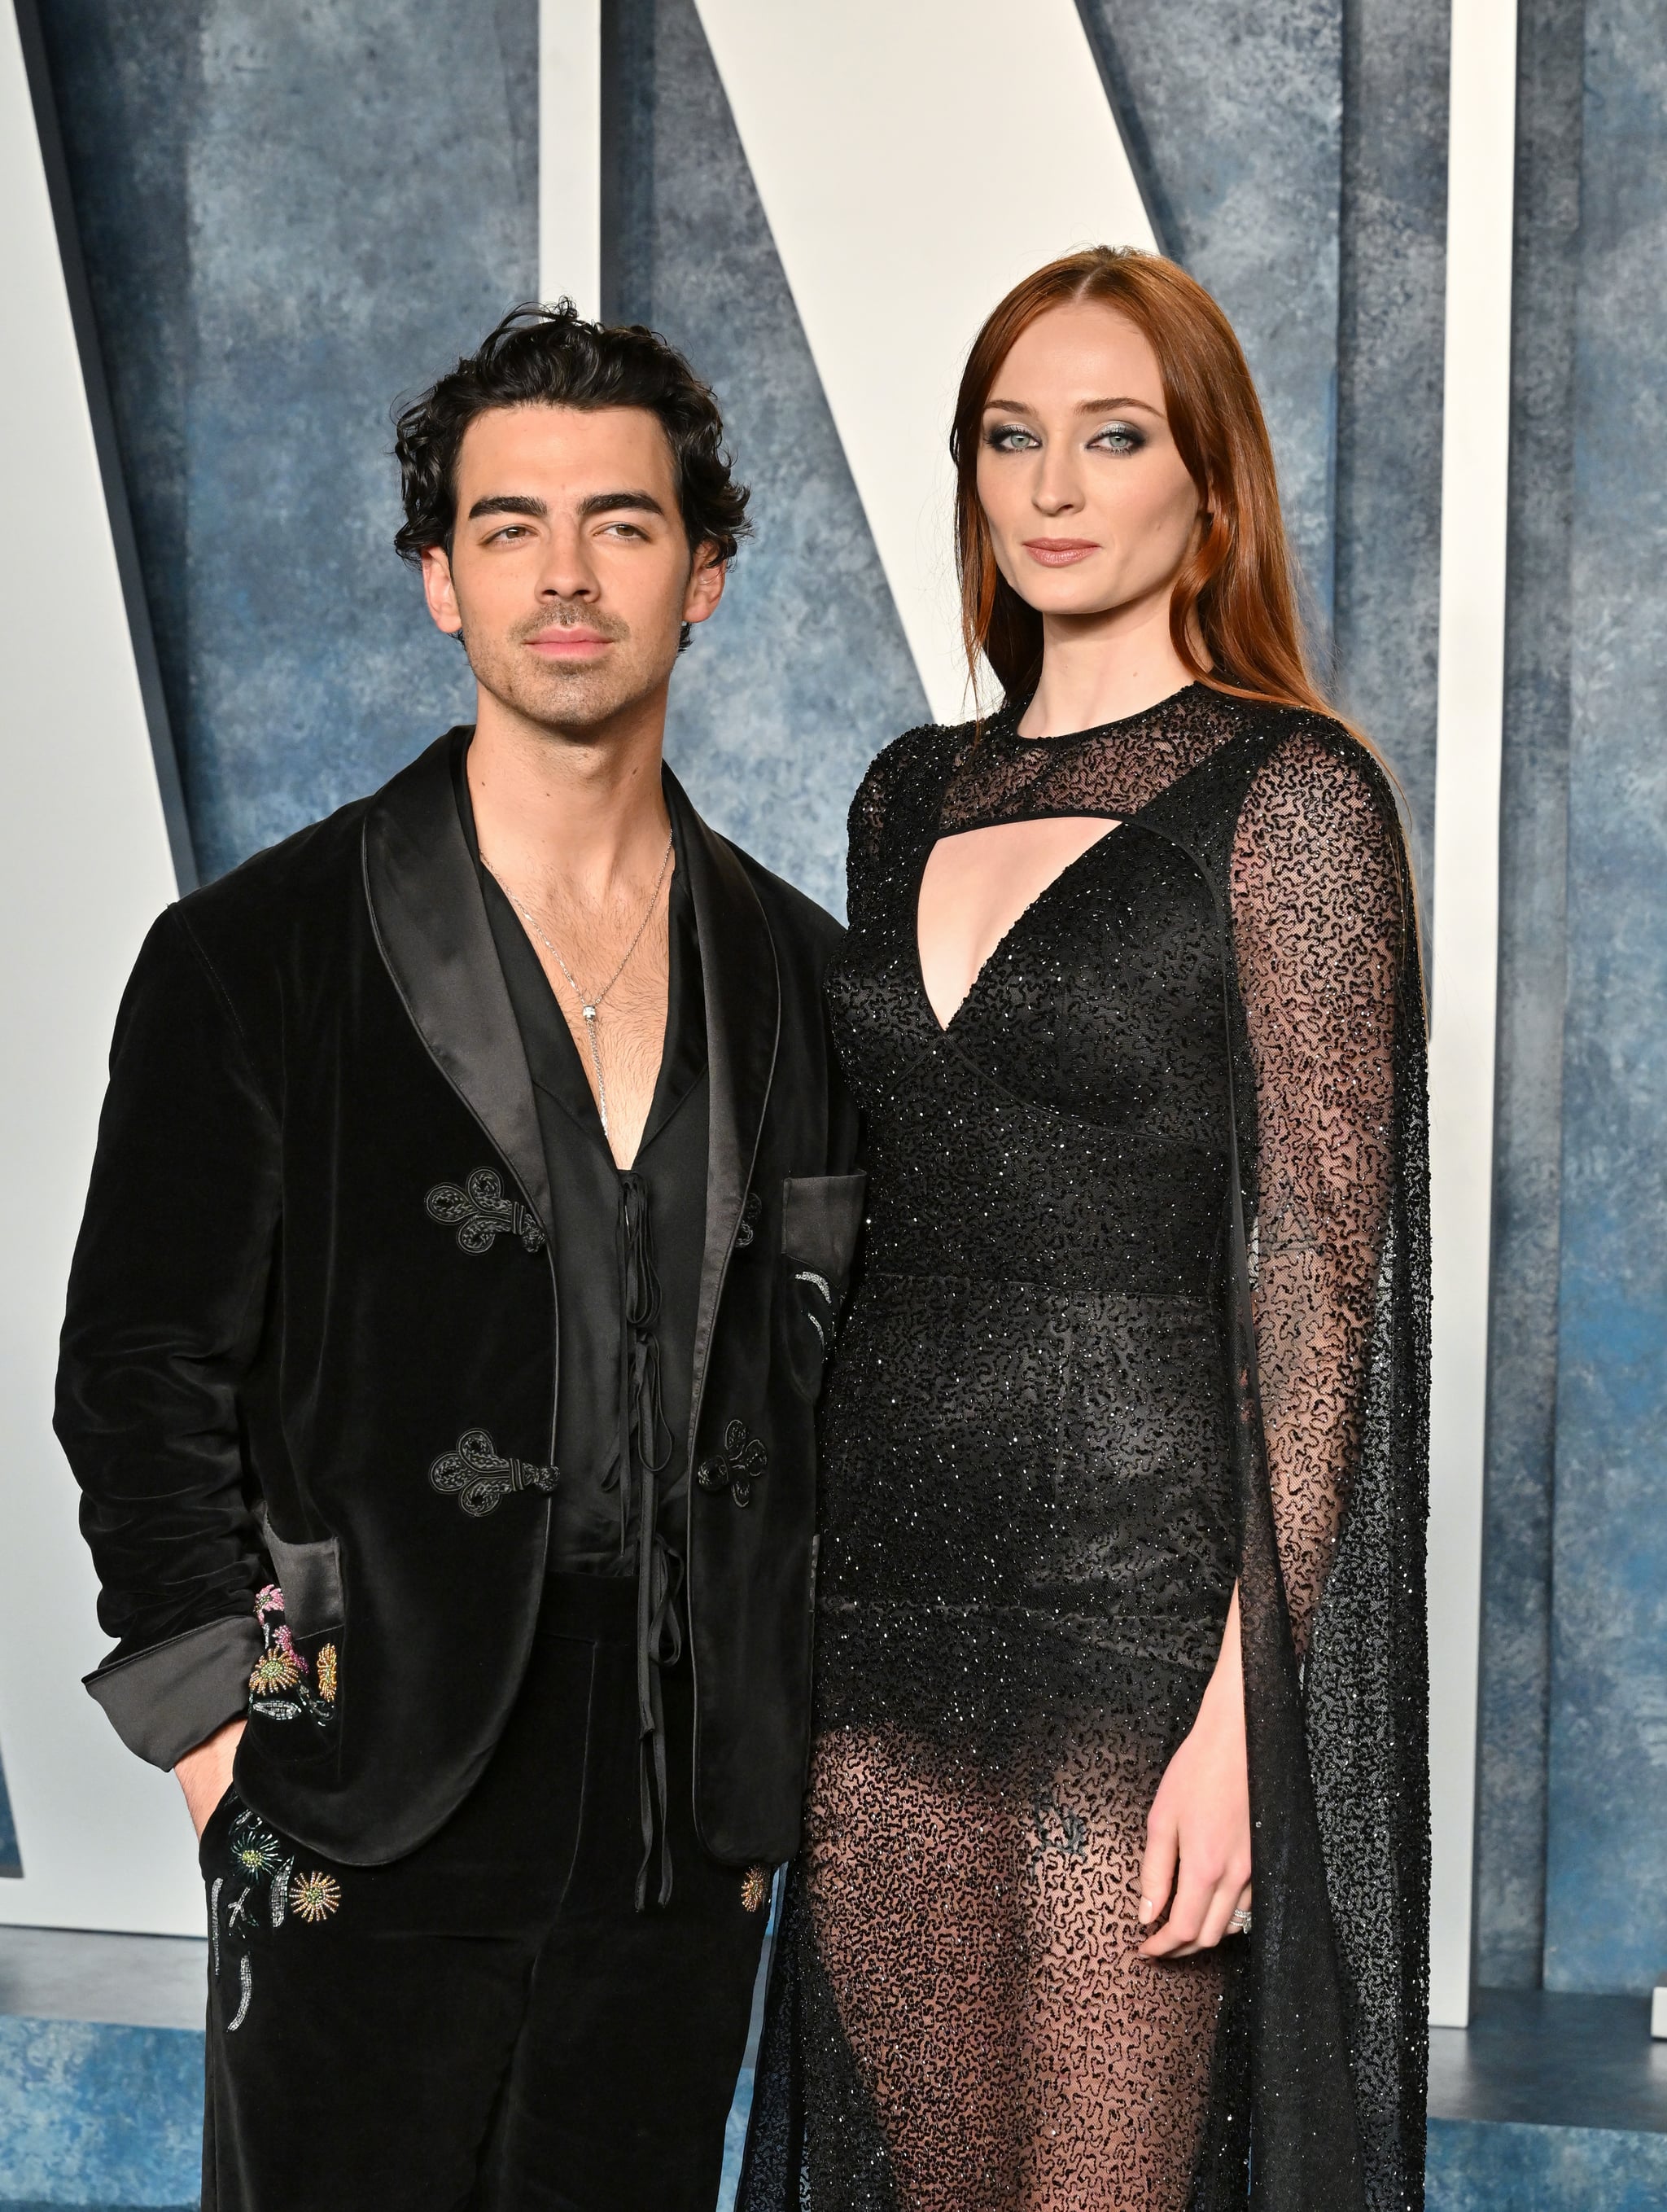 BEVERLY HILLS, CALIFORNIA - MARCH 12: Joe Jonas and Sophie Turner attend the 2023 Vanity Fair Oscar Party hosted by Radhika Jones at Wallis Annenberg Center for the Performing Arts on March 12, 2023 in Beverly Hills, California. (Photo by Axelle/Bauer-Griffin/FilmMagic)